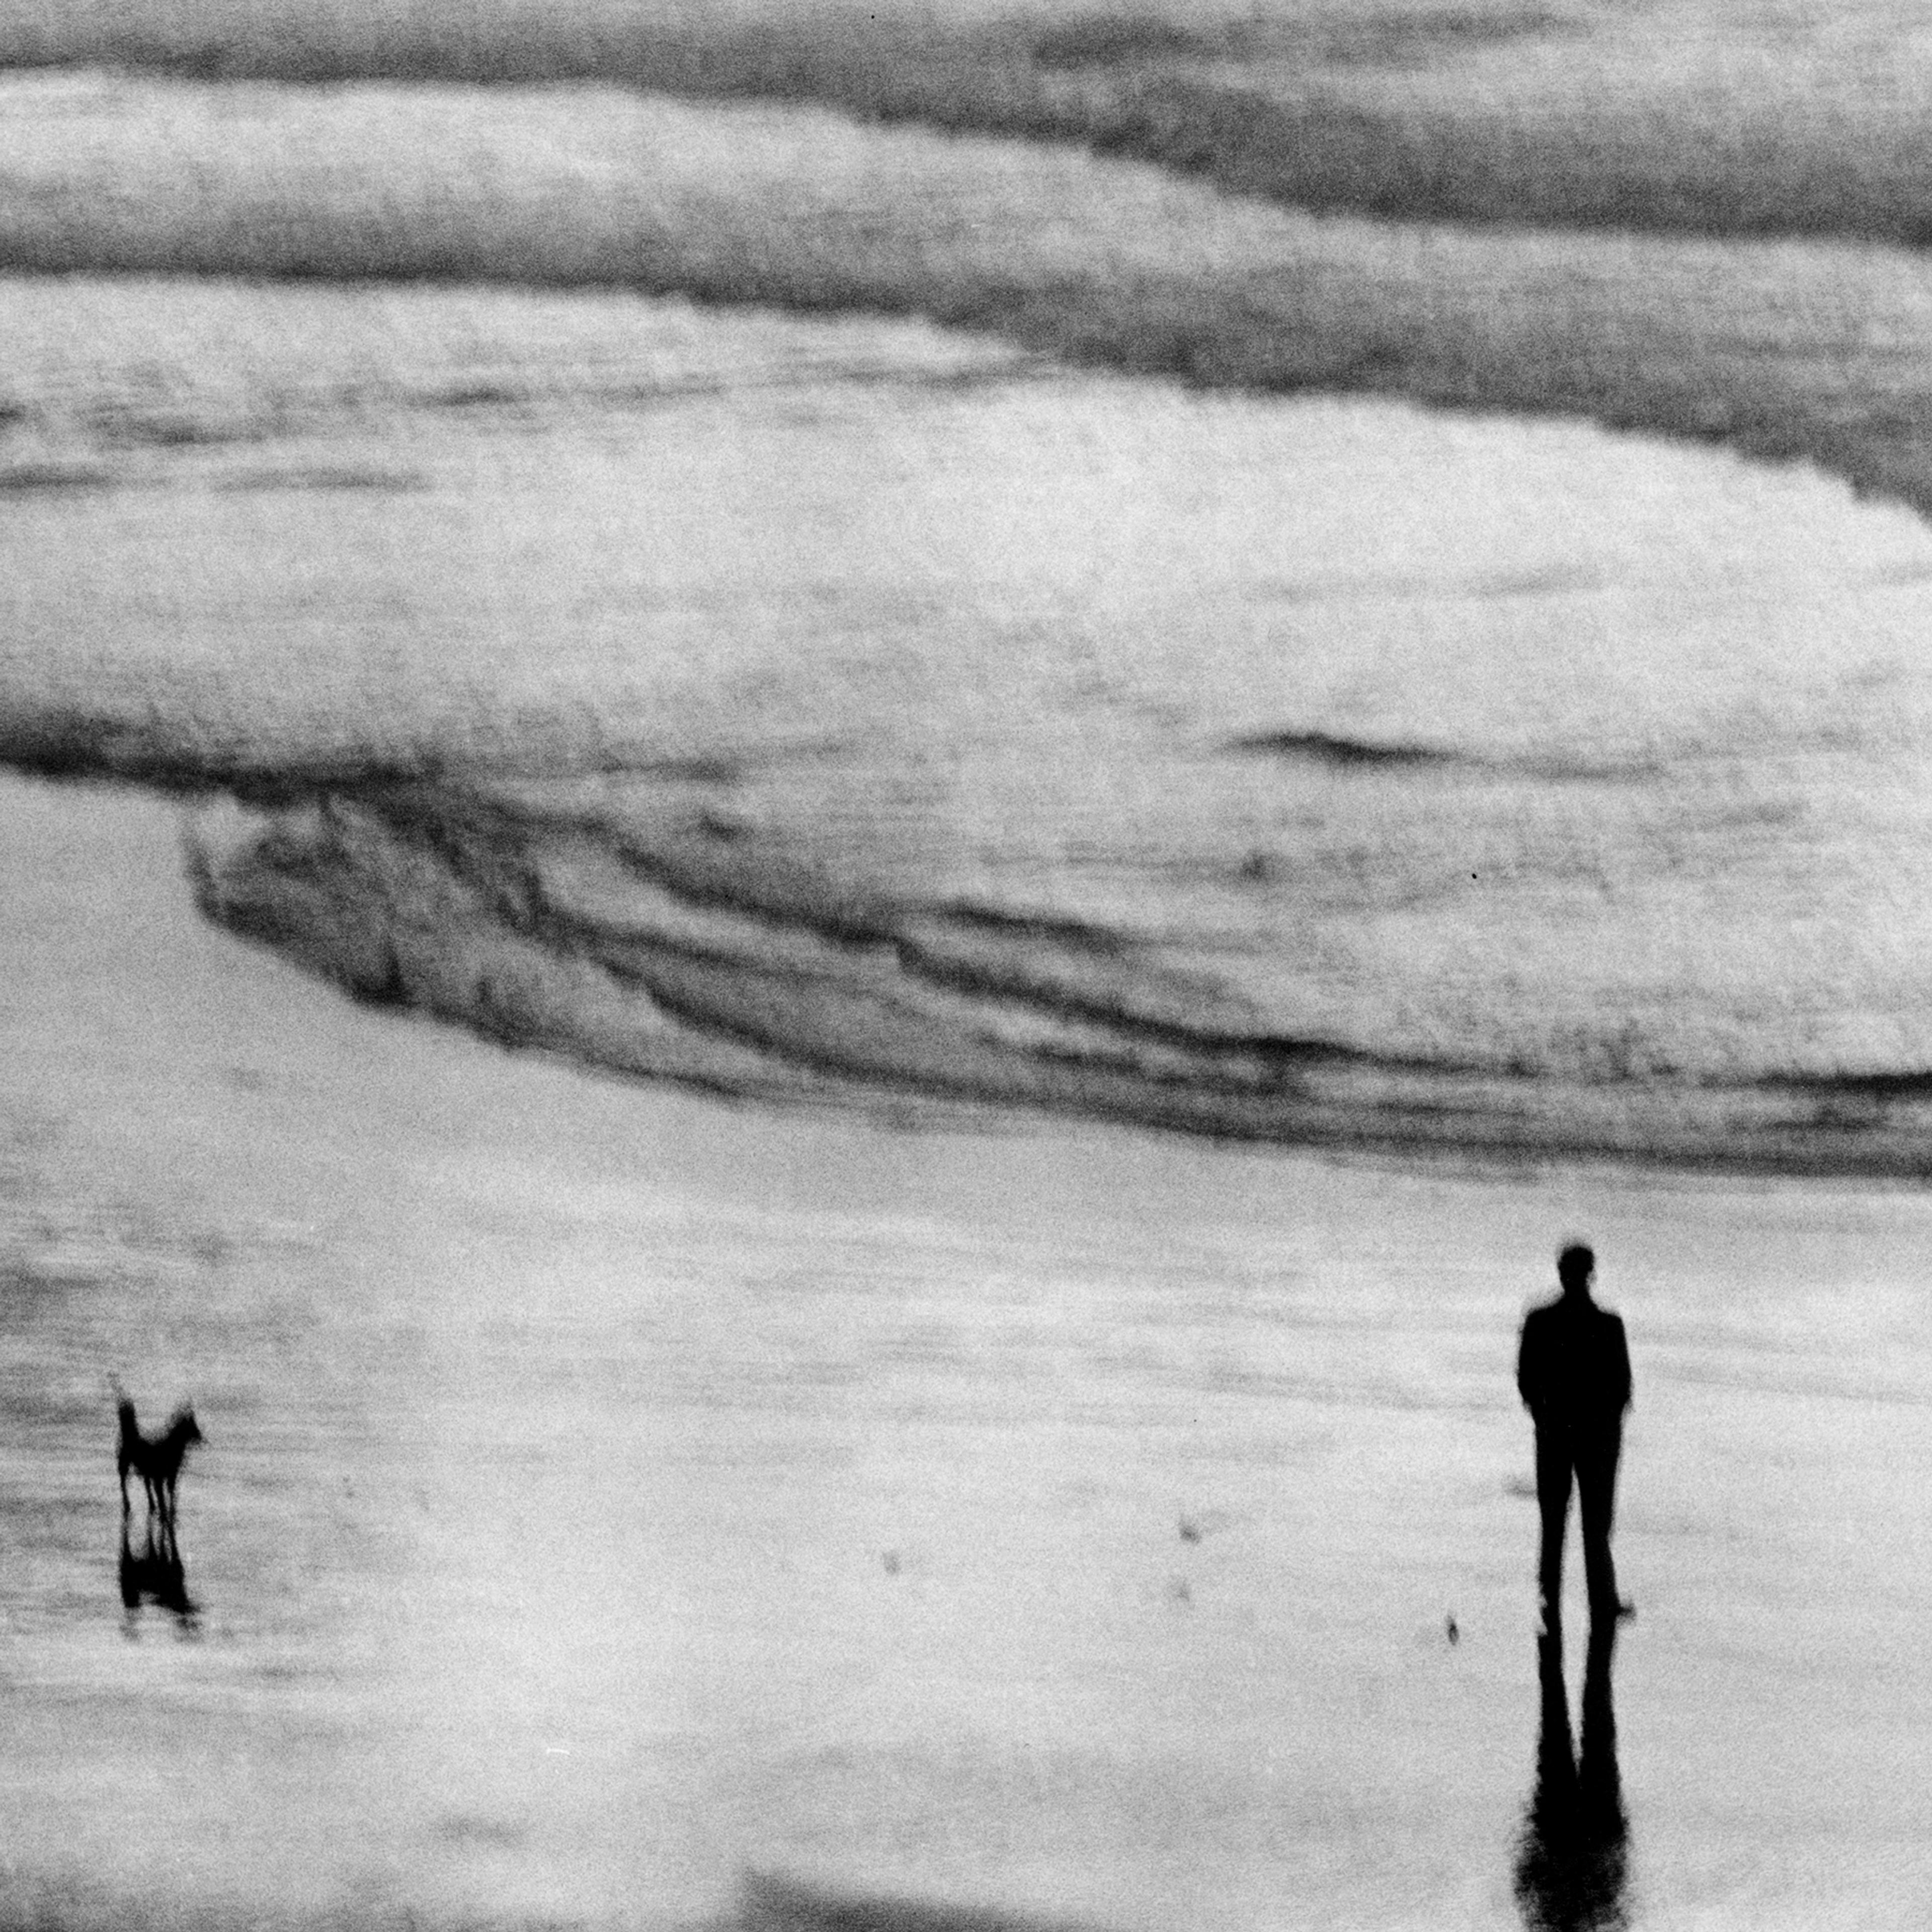 A monochrome photograph from above of a man looking out to sea. His hands are in his pockets and a dog waits some metres away